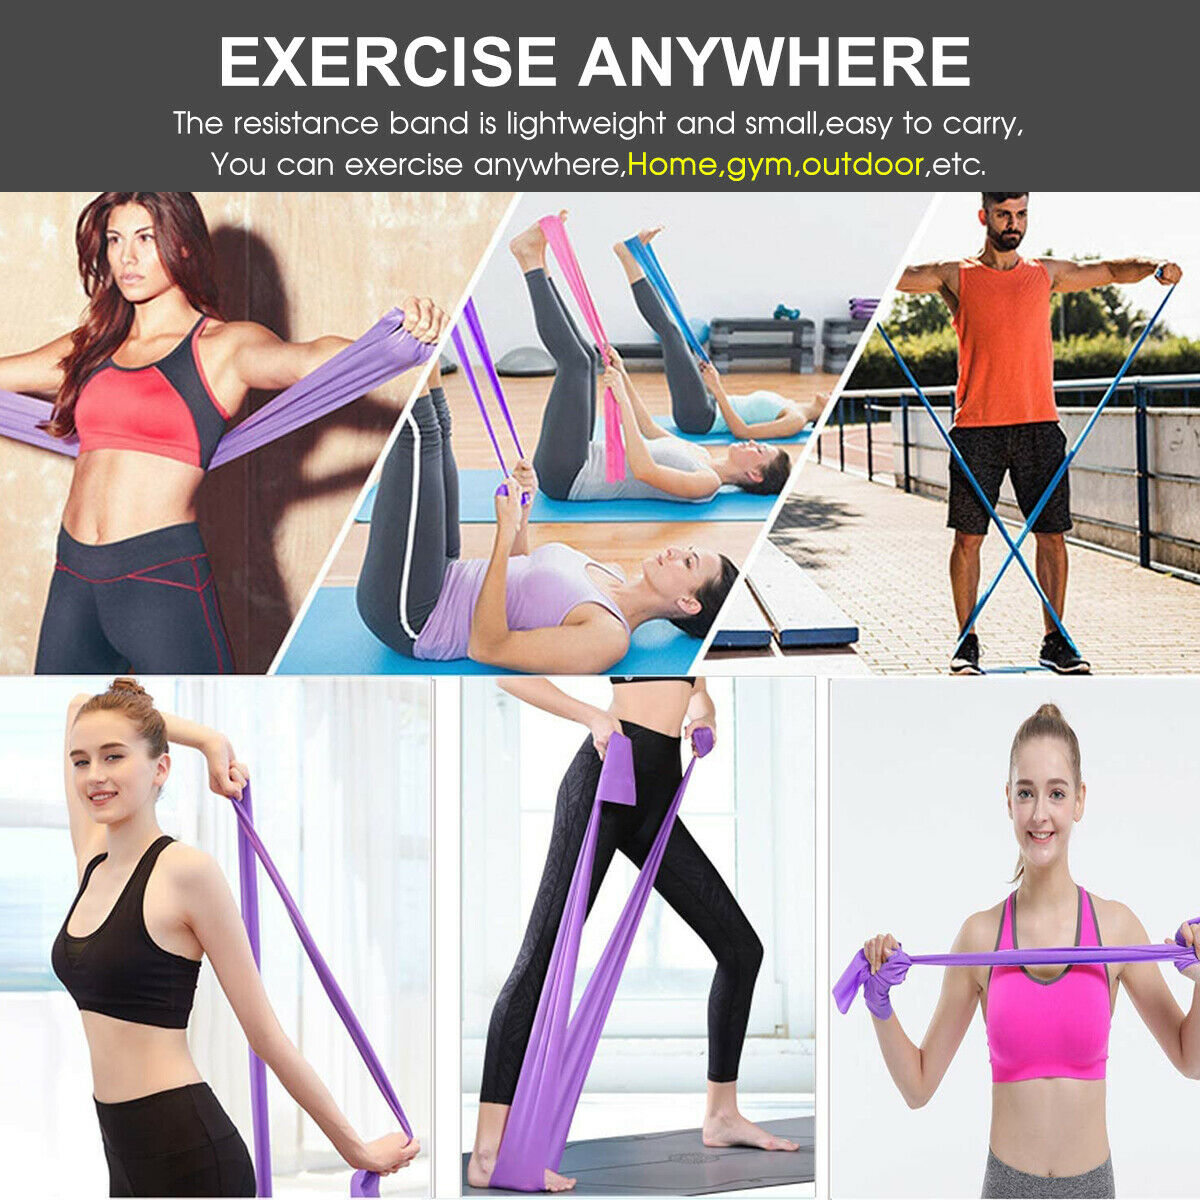 Home Gym Abs Equipment Exercise Body Fitness Abdominal Training